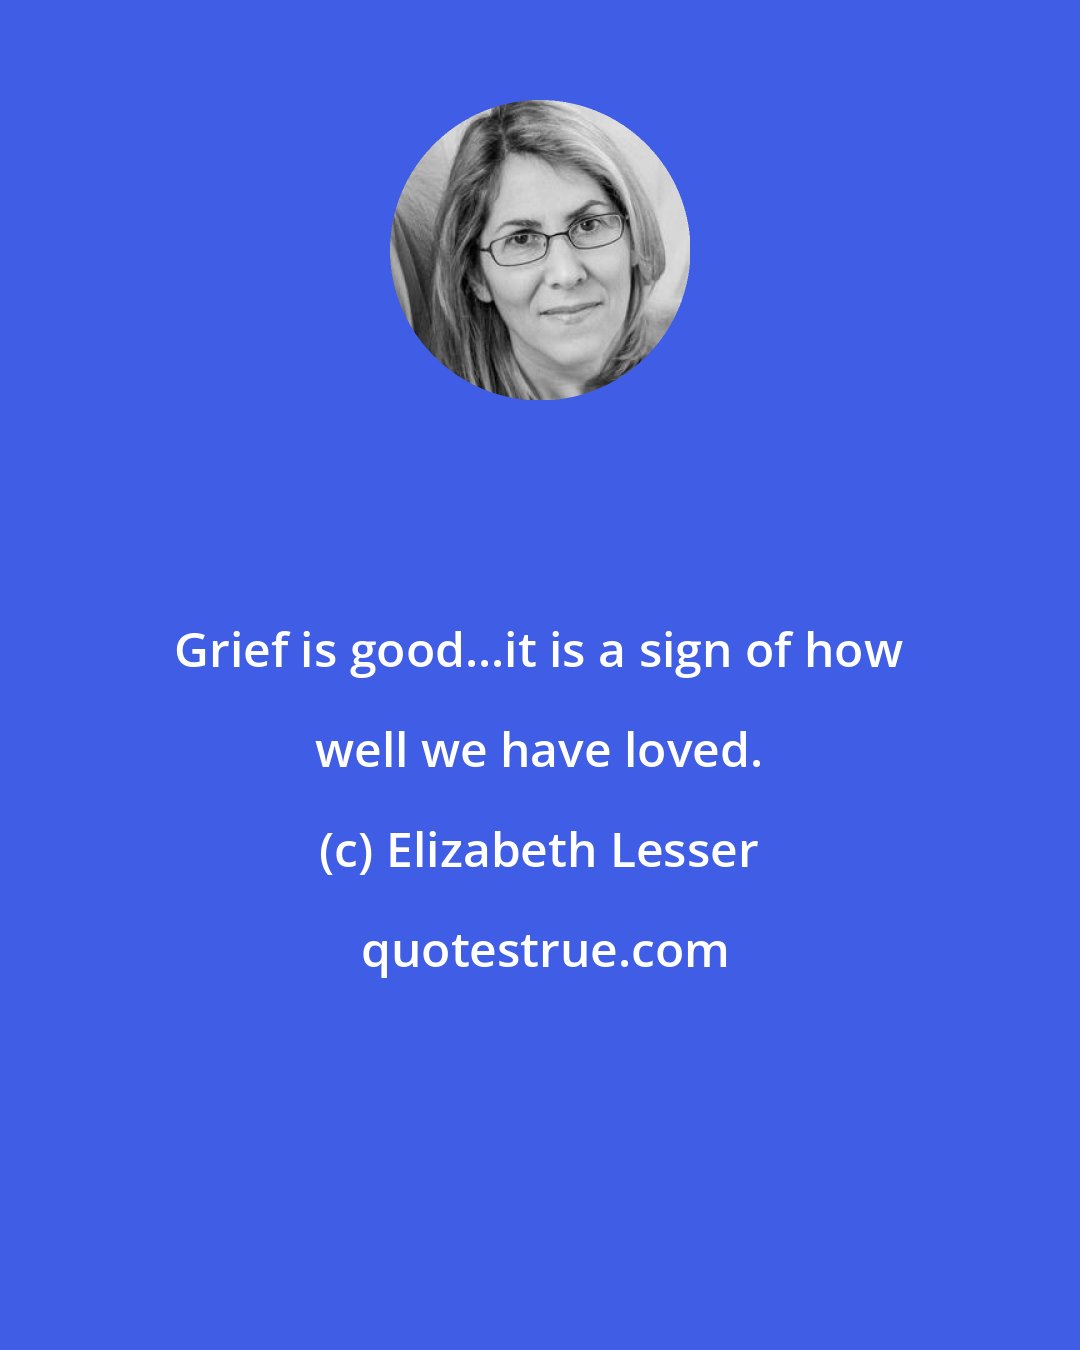 Elizabeth Lesser: Grief is good...it is a sign of how well we have loved.